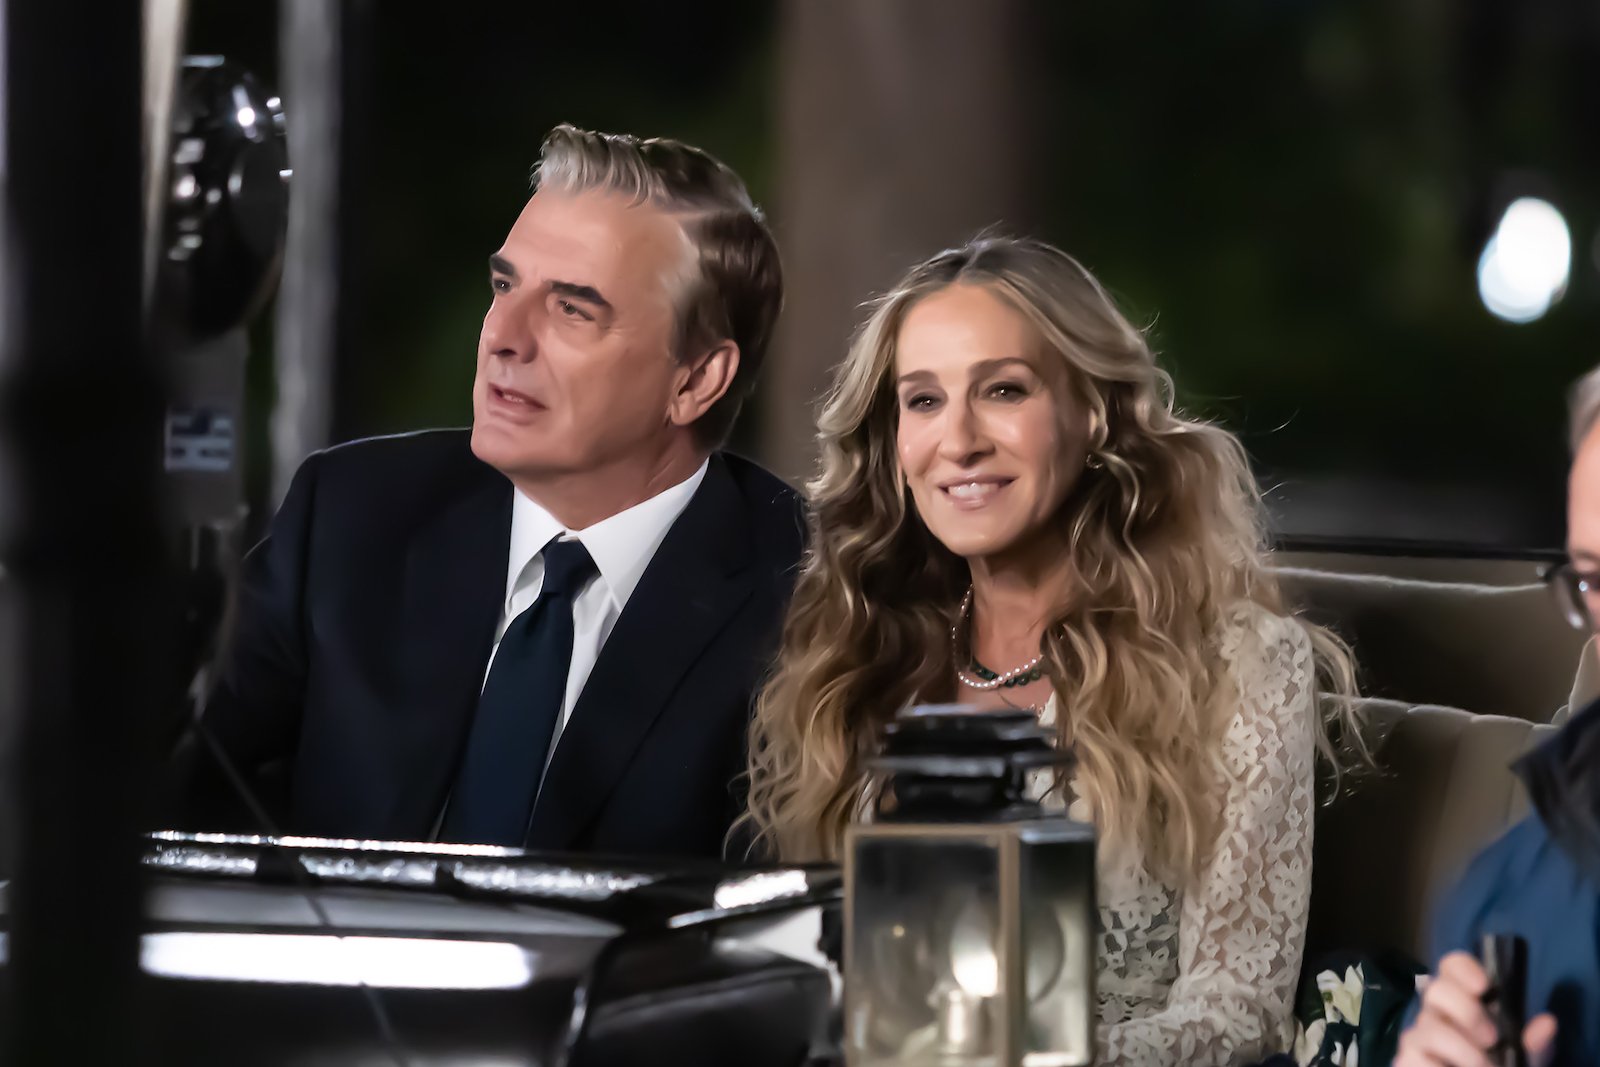 Chris Noth as Mr. Big and Sarah Jessica Parker as Carrie Bradshaw on the 'And Just Like That ...' set